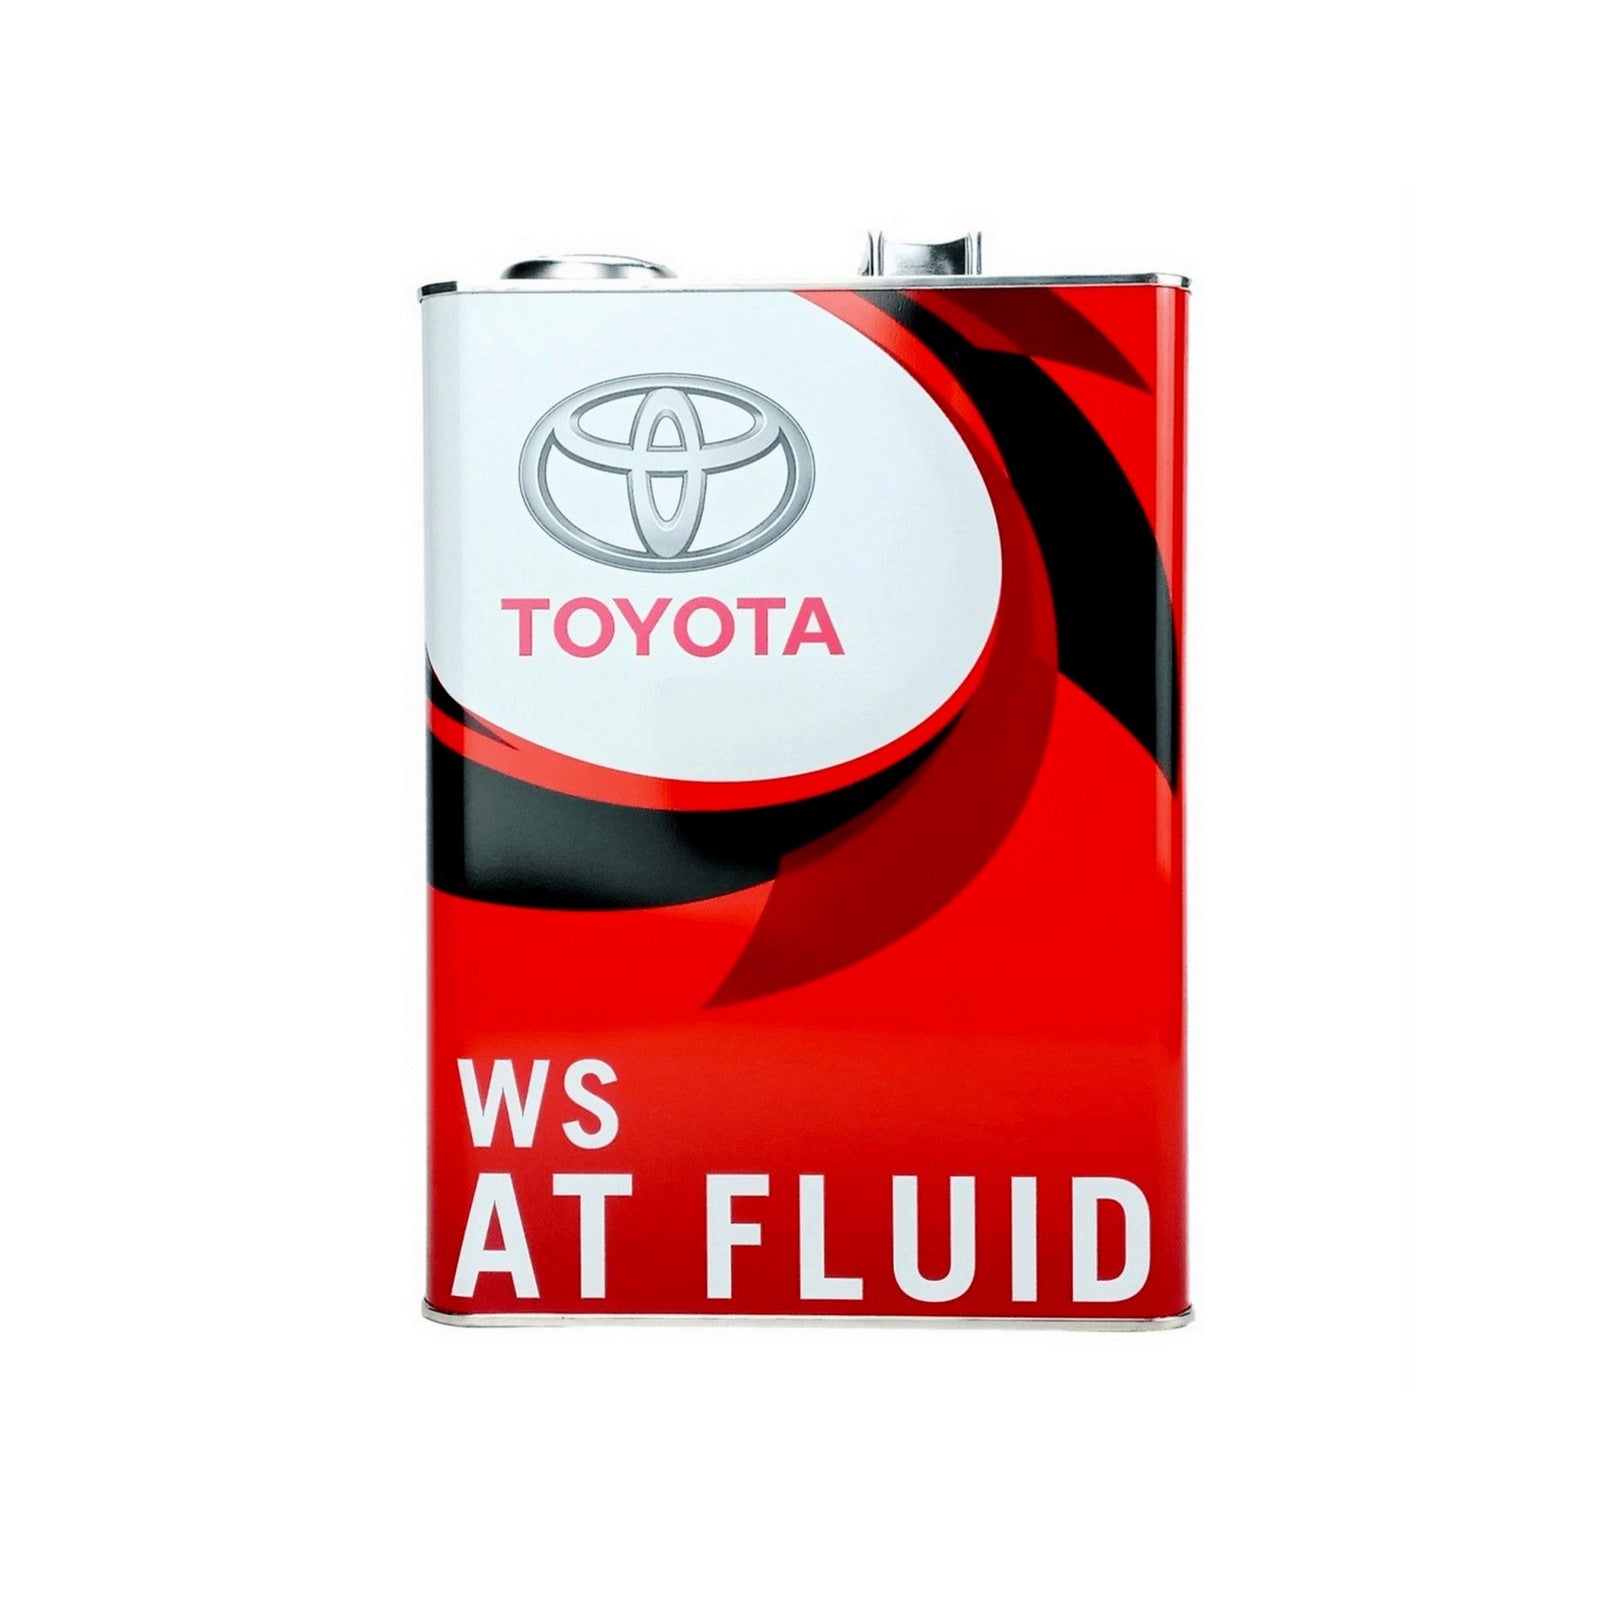 What transmission fluid to use now on 2000 land cruiser?